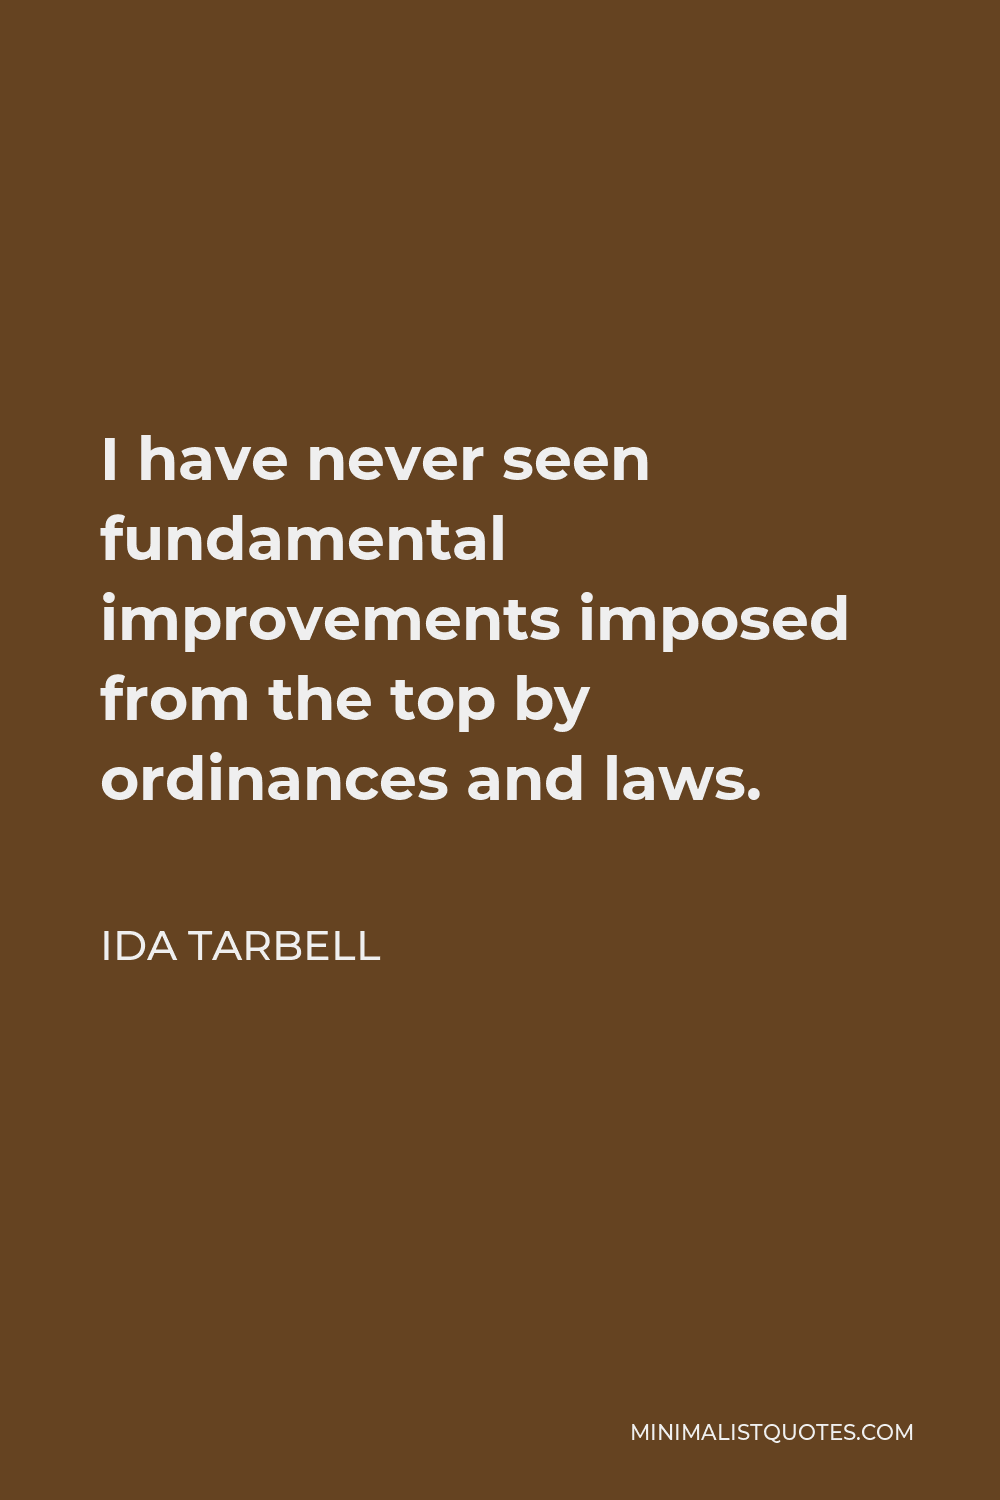 Ida Tarbell Quote - I have never seen fundamental improvements imposed from the top by ordinances and laws.